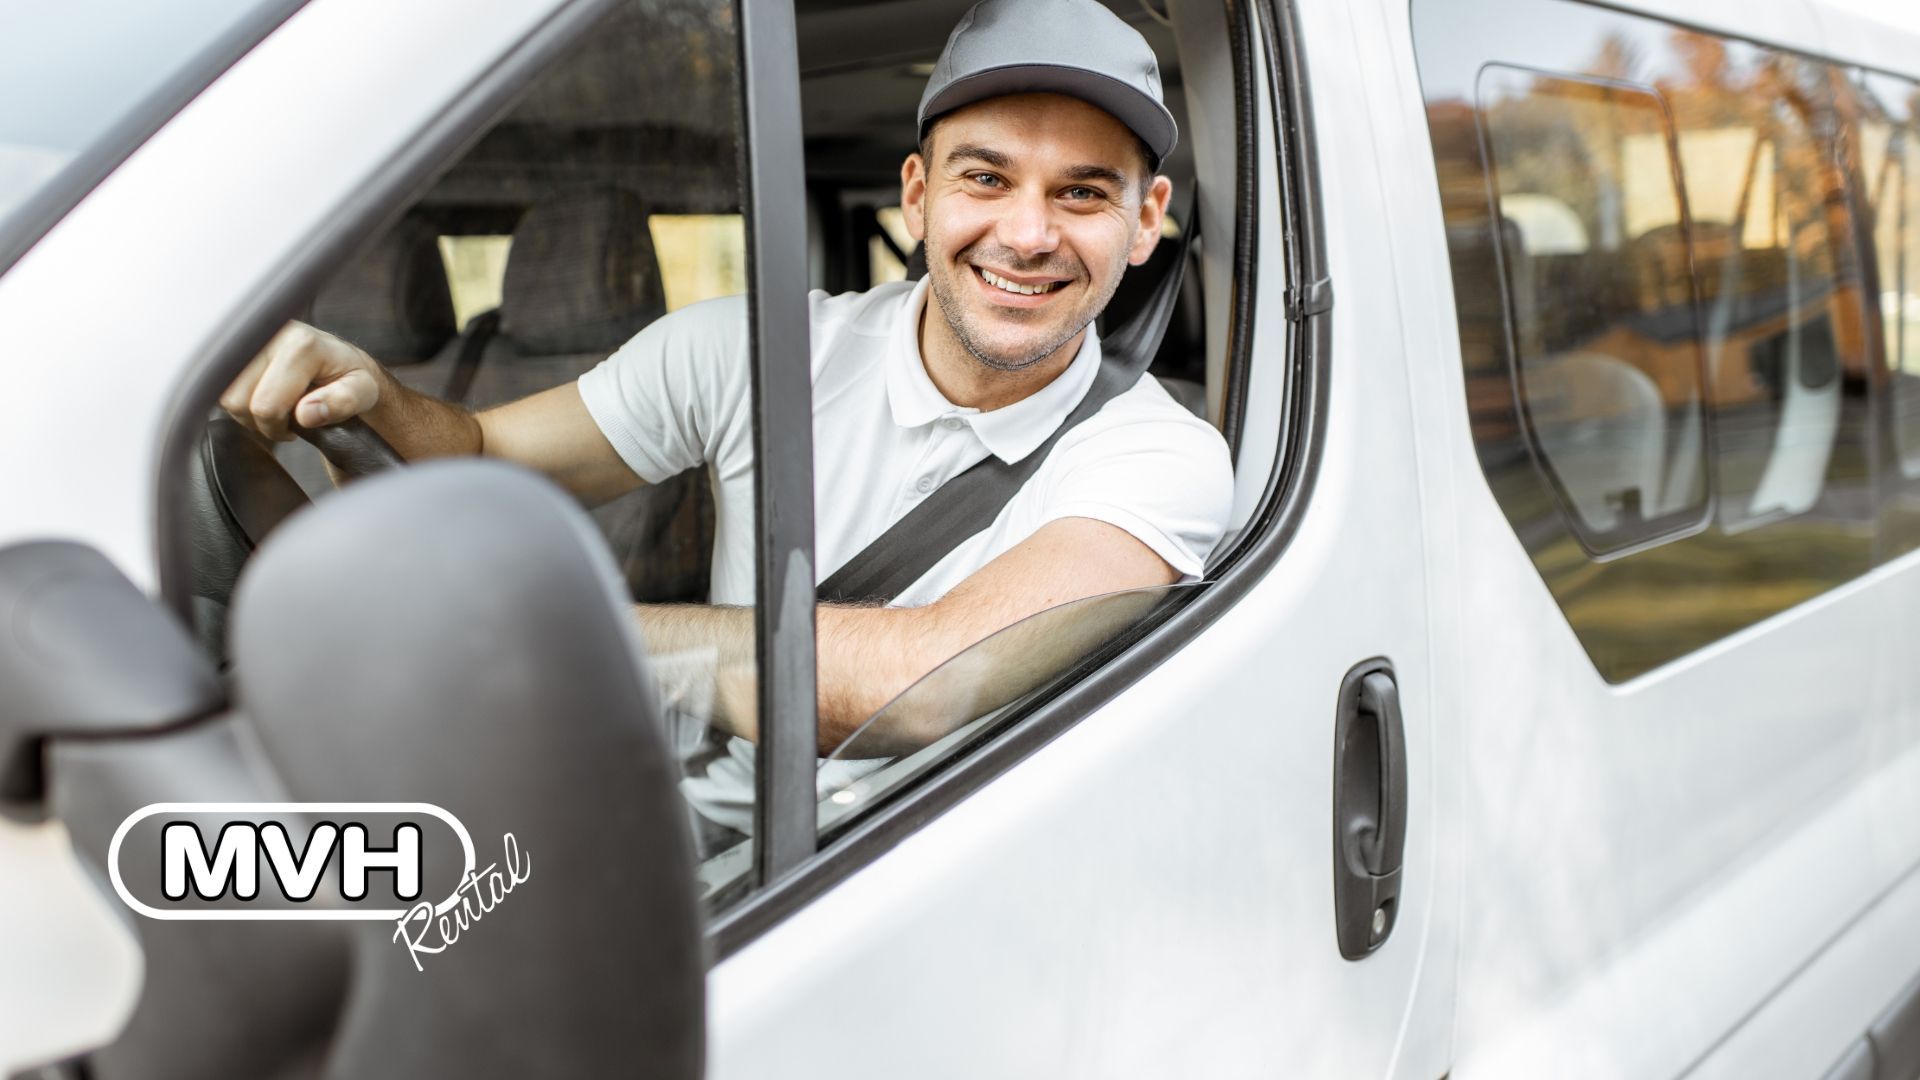 Are you looking to rent a van but feel a little bit nervous about driving it for the first time? Here are our 10 top tips for first-time van drivers.